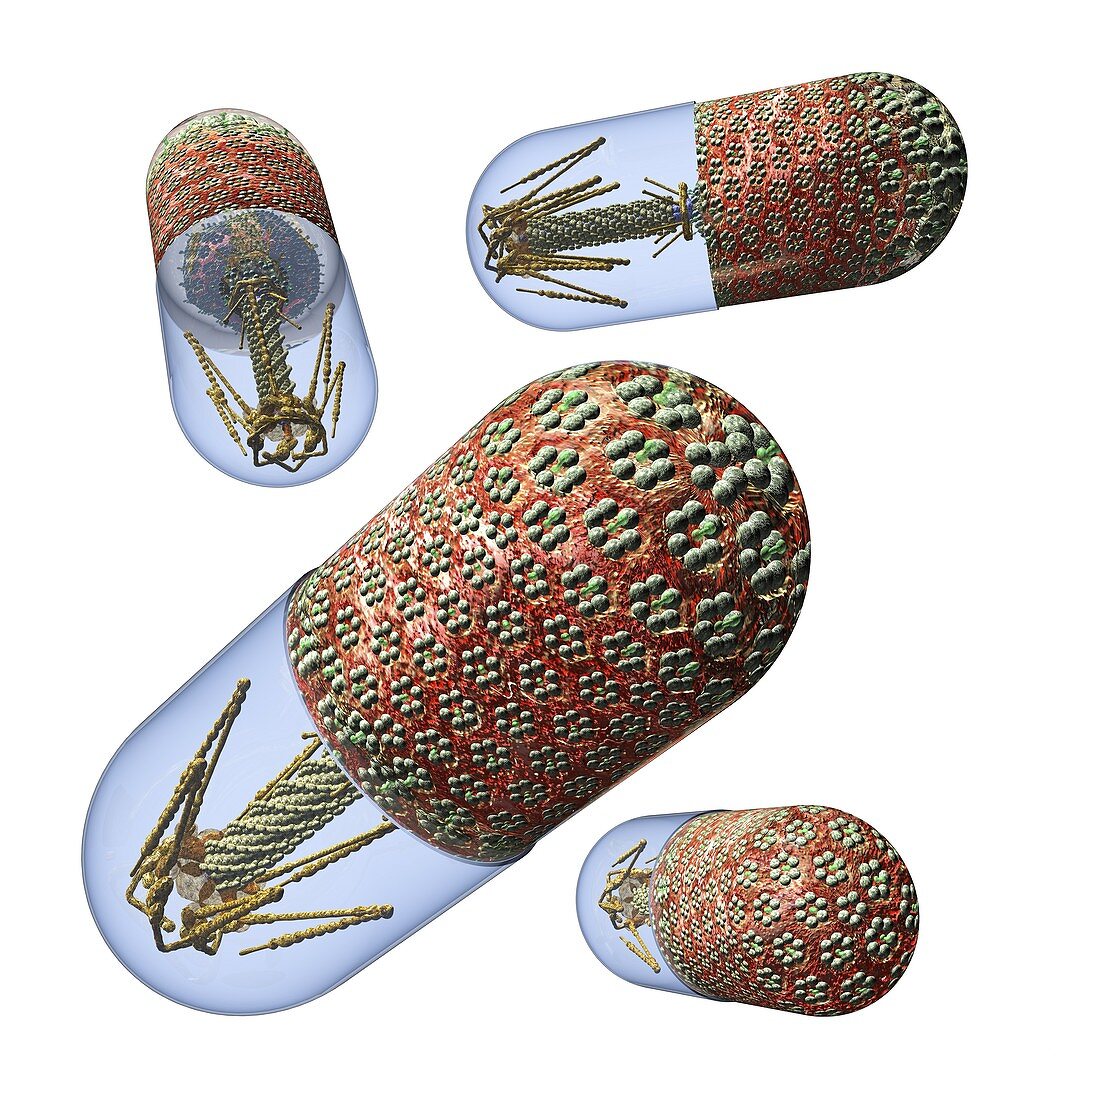 Phage therapy capsules,conceptual image